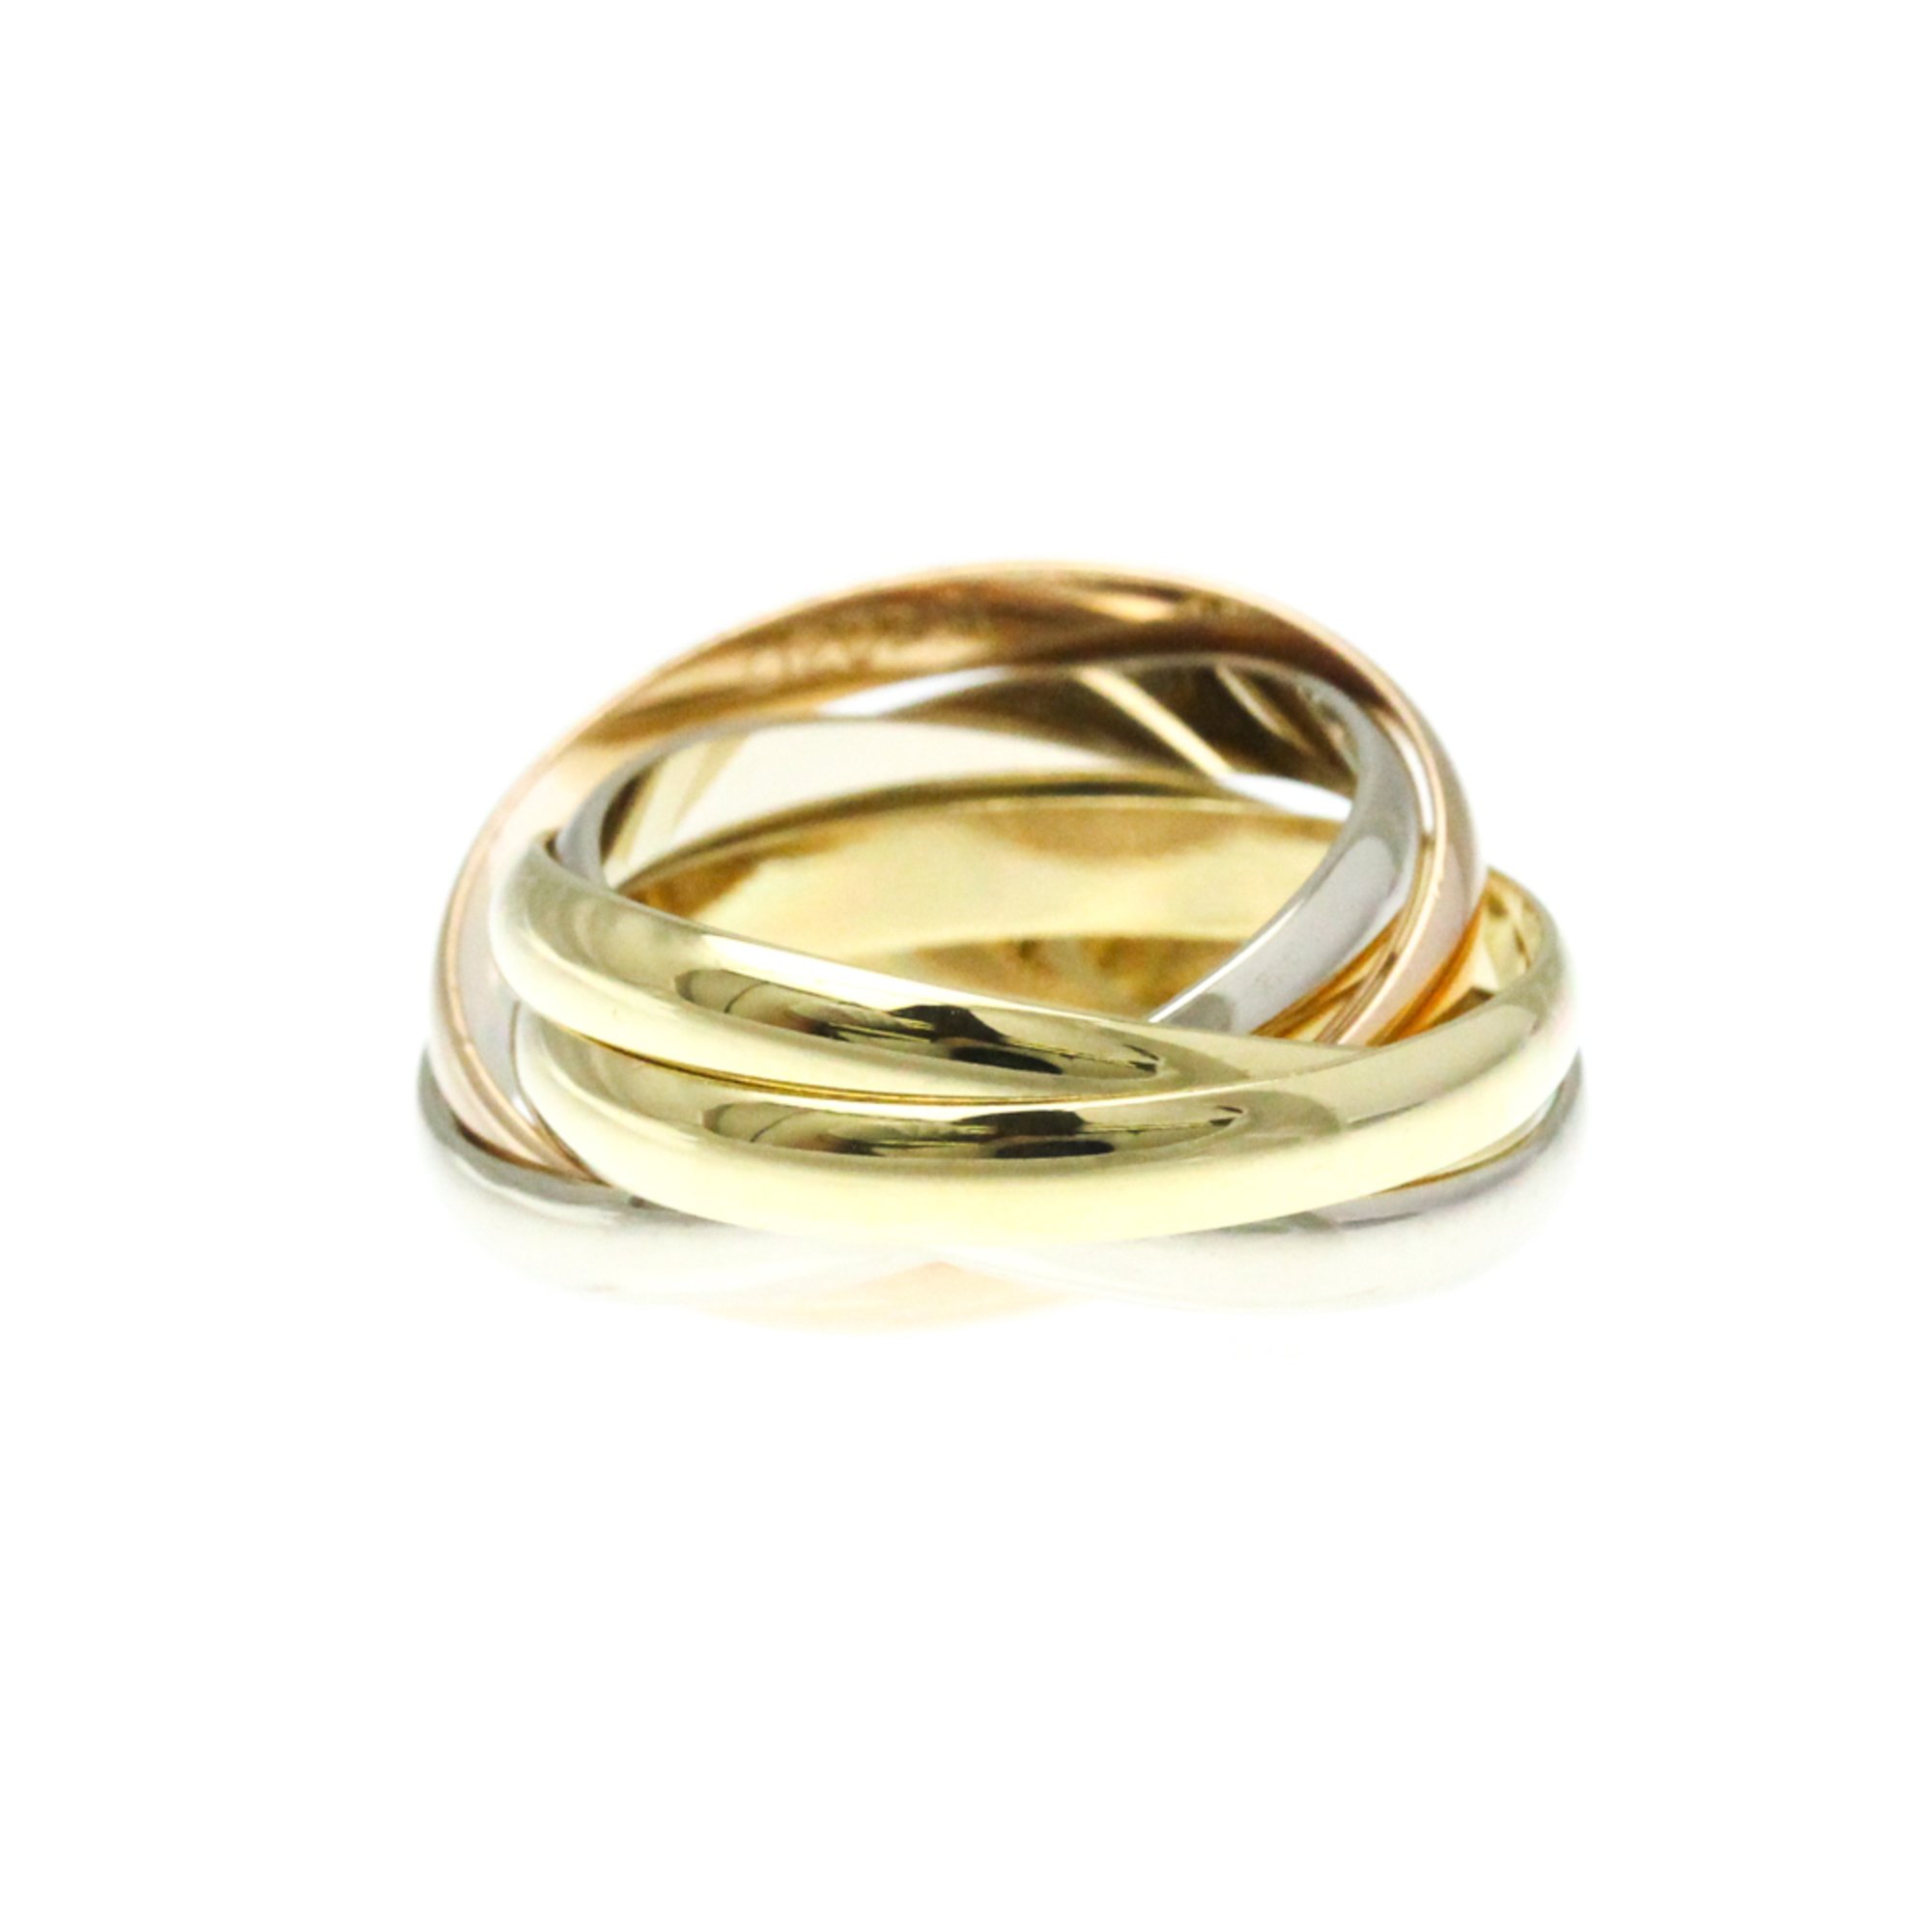 Cartier Trinity Ring 5 Rows Pink Gold (18K),White Gold (18K),Yellow Gold (18K) Fashion No Stone Band Ring Gold